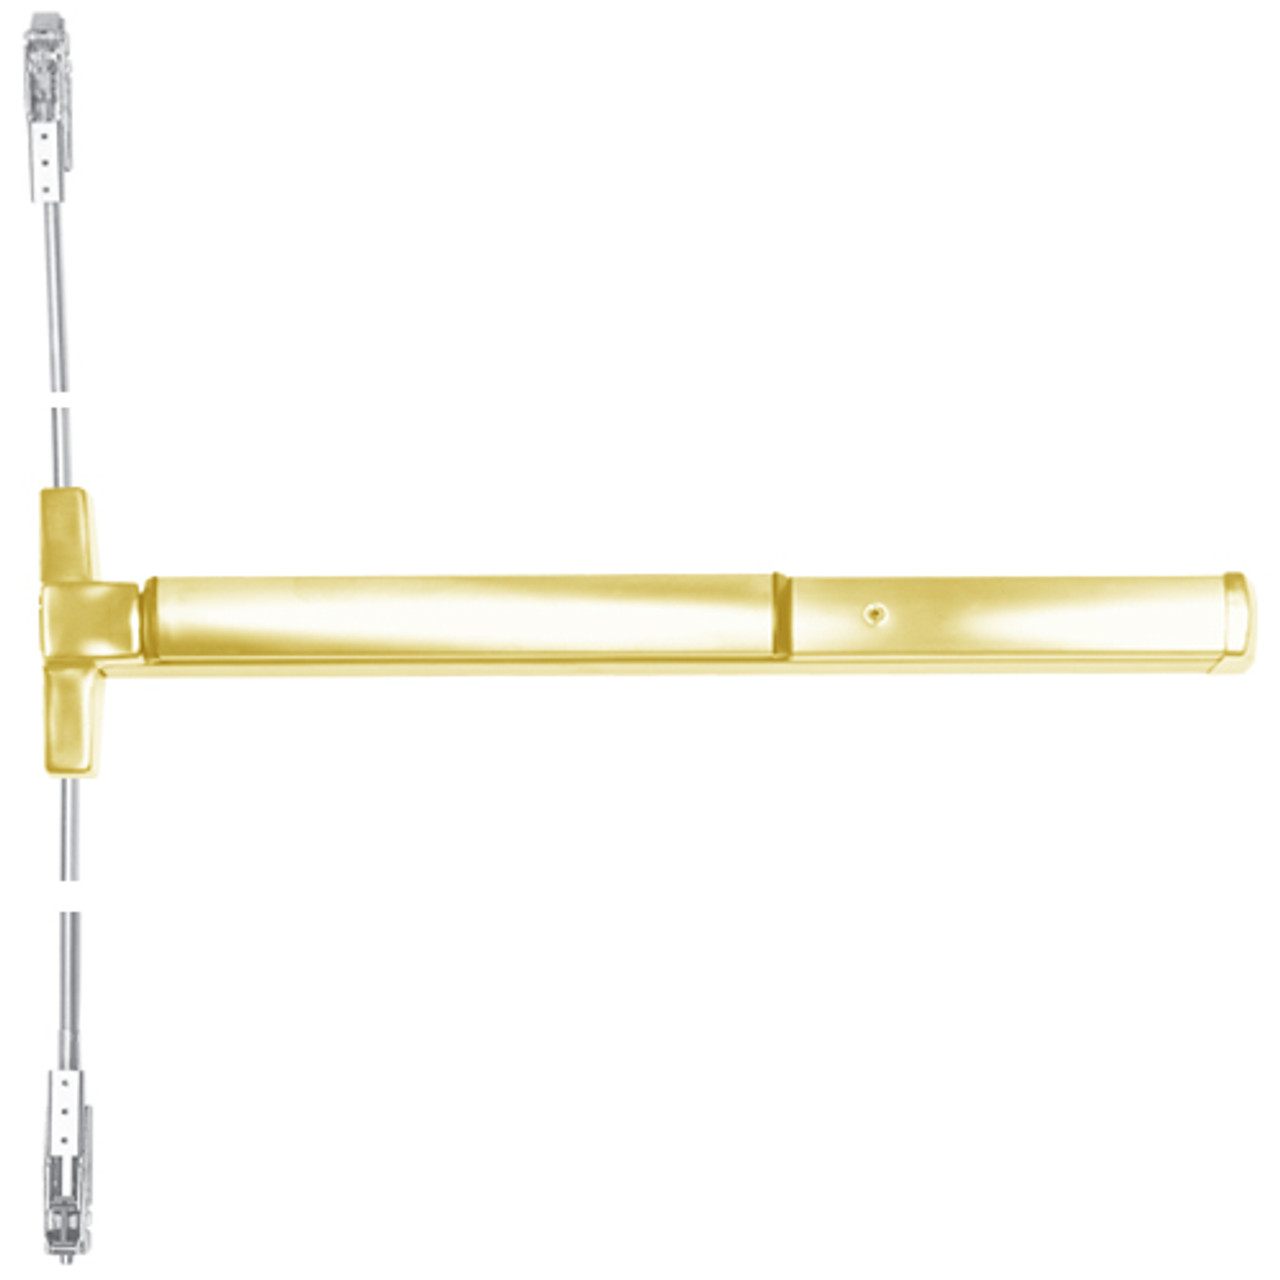 ED4800-605-M61 Corbin ED4800 Series Non Fire Rated Concealed Vertical Rod Exit Device with Exit Alarm Device in Bright Brass Finish